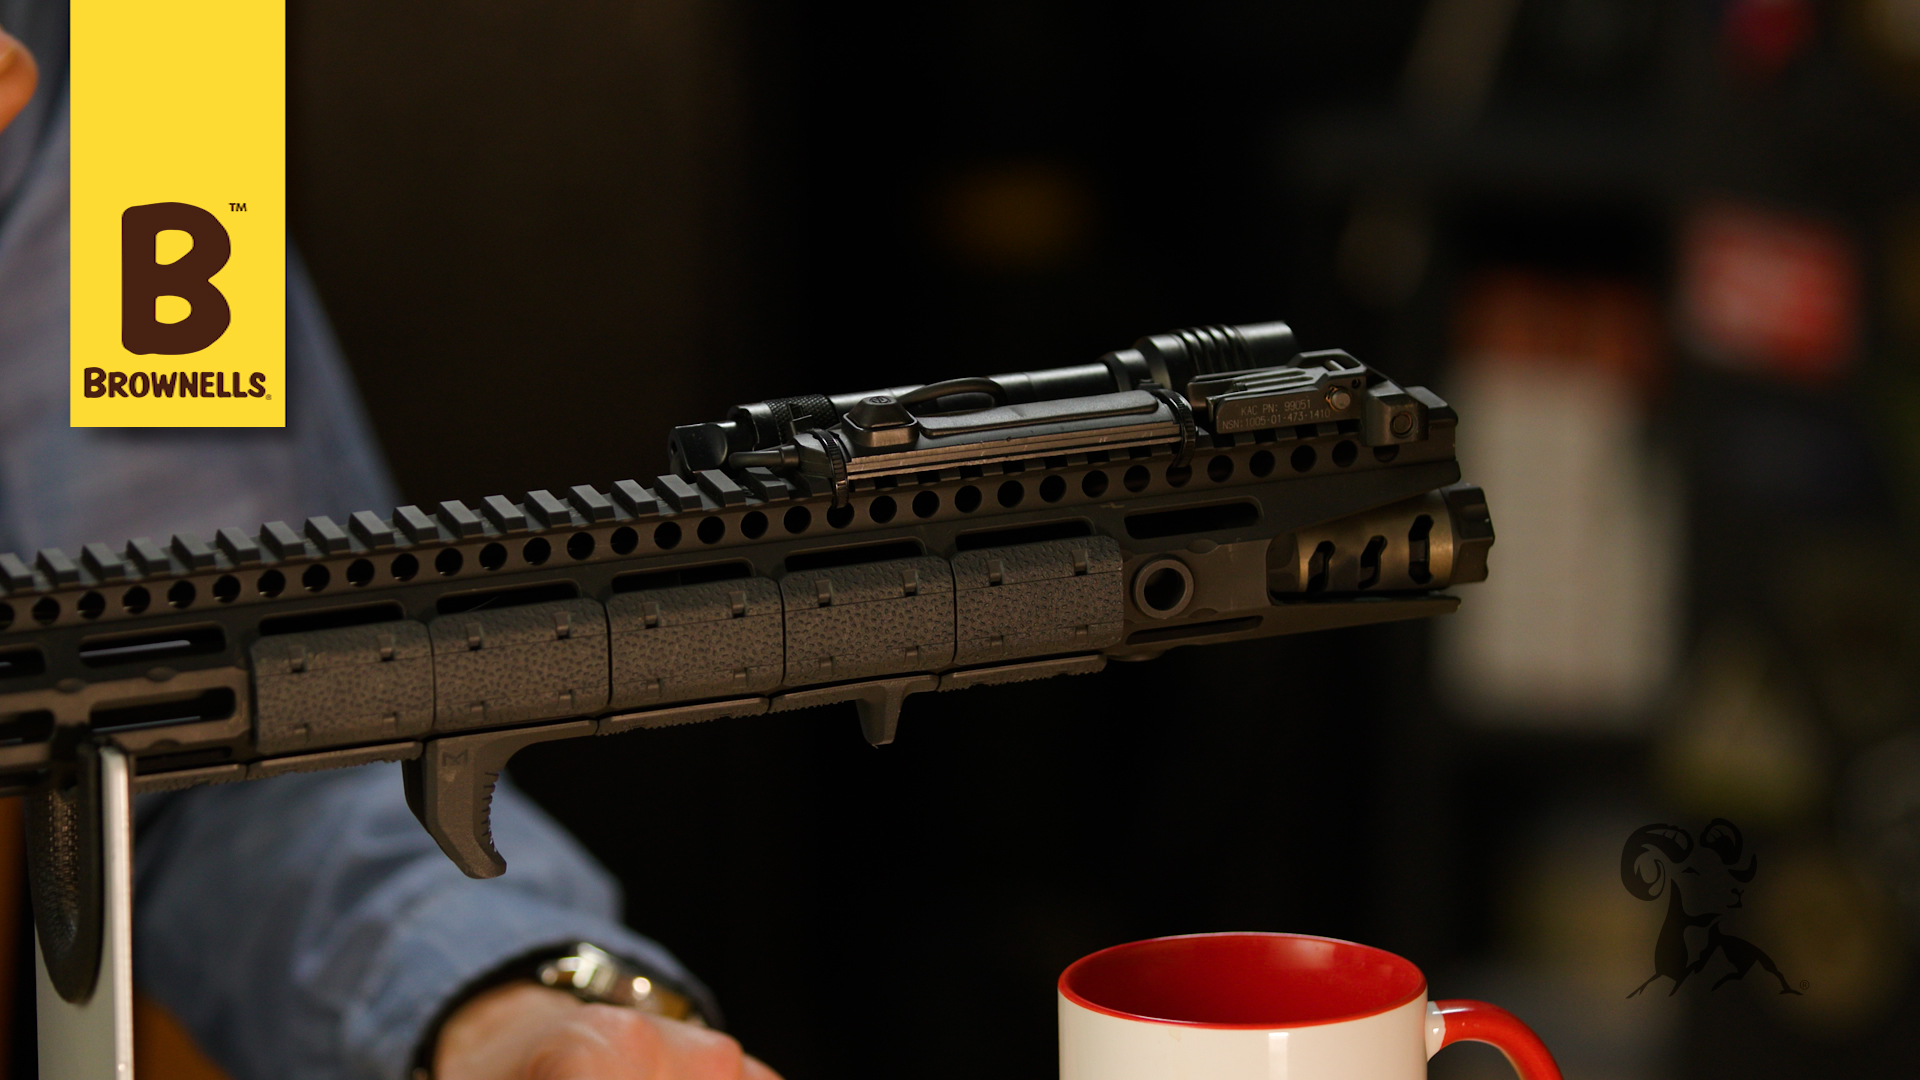 From The Vault: A Tour of Caleb's Personal AR-15